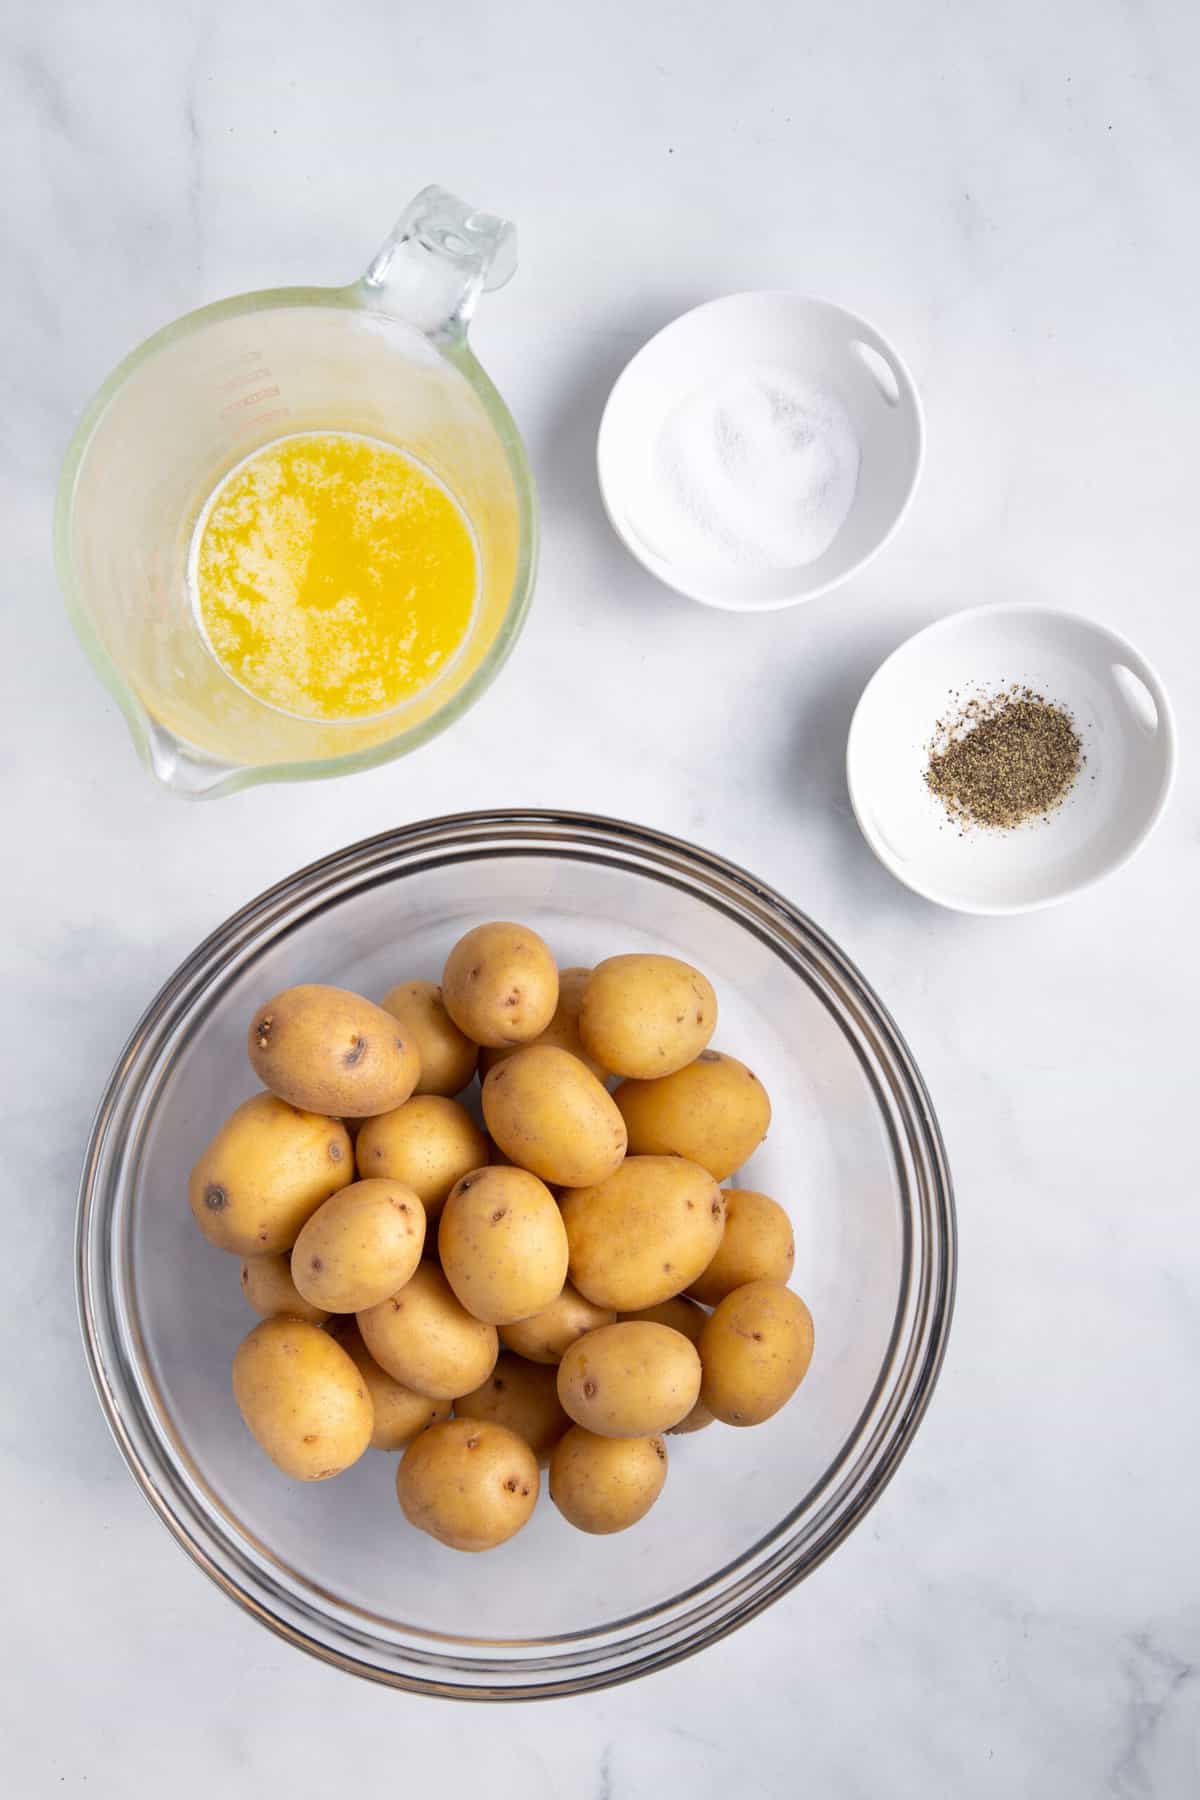 The ingredients needed to make crispy smashed potatoes are shown in bowls: butter, salt, pepper, and potatoes.